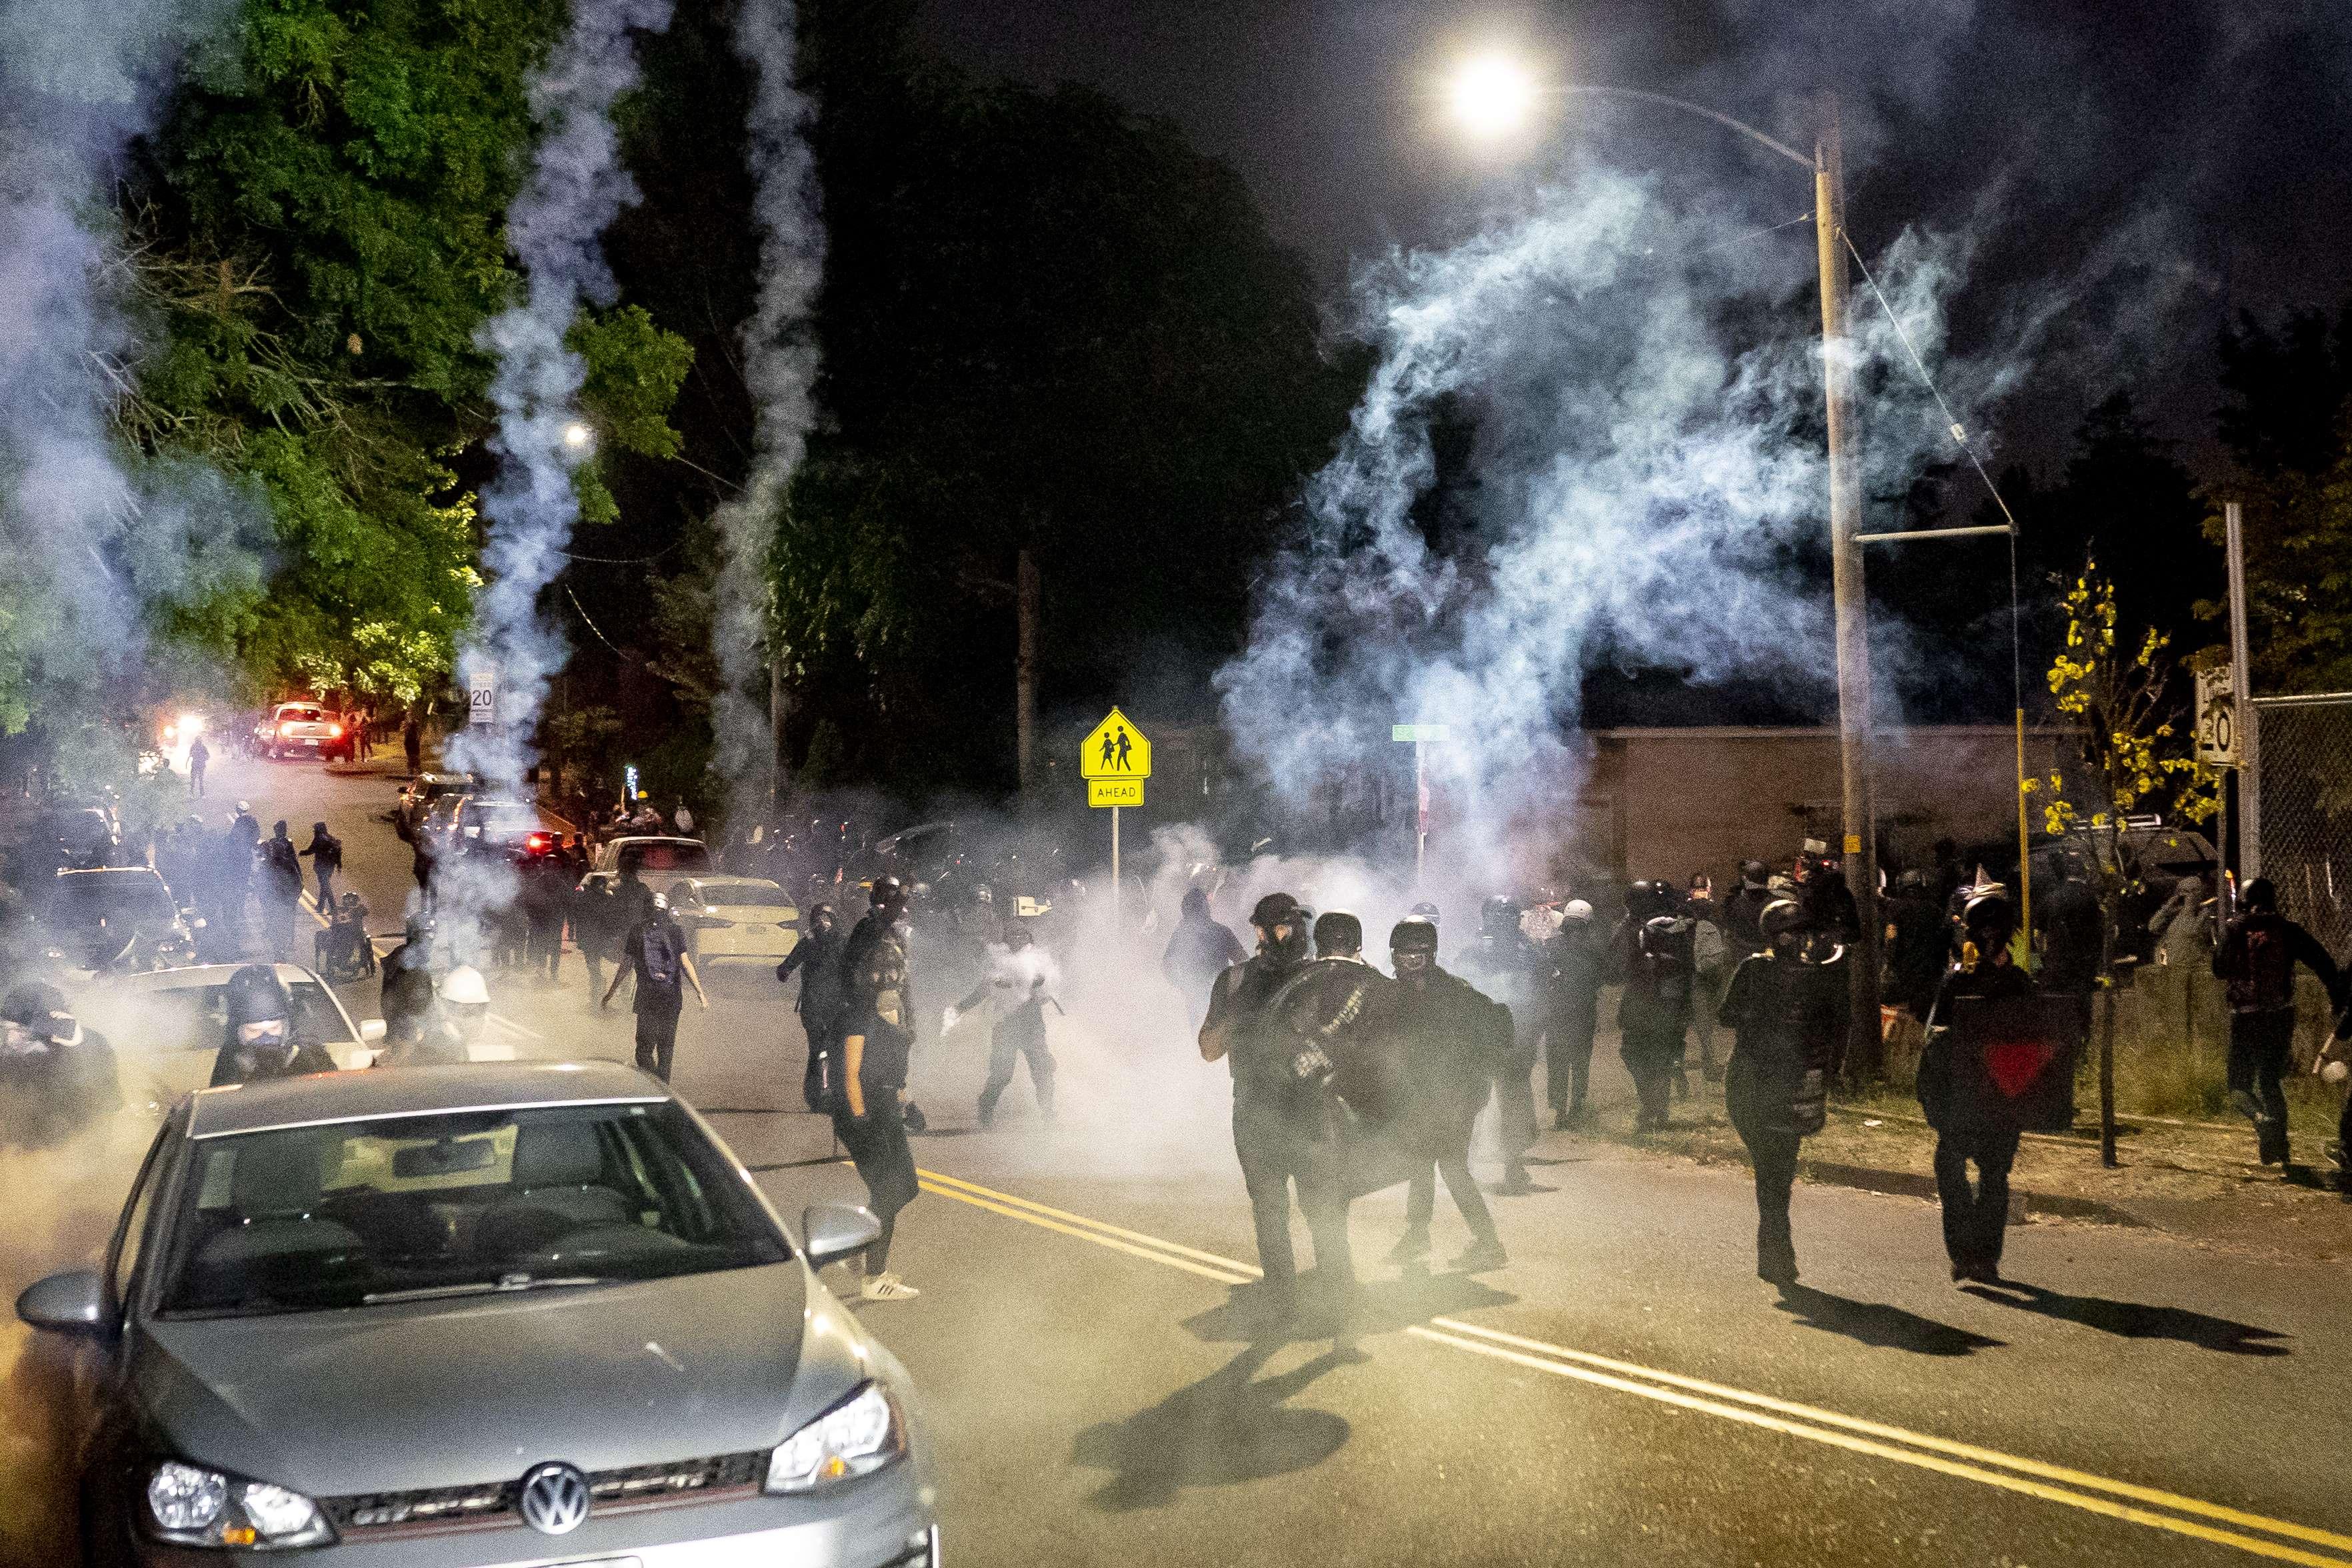 VANCOUVER WASH - SEPTEMBER 5: Protesters retreat through tear gas as Portland police disperse a protest against police brutality and racial injustice on September 5, 2020 in Portland, Oregon. Portland has seen nightly protests for the past 100 days following the death of George Floyd in police custody.   Nathan Howard/Getty Images/AFP
== FOR NEWSPAPERS, INTERNET, TELCOS & TELEVISION USE ONLY ==